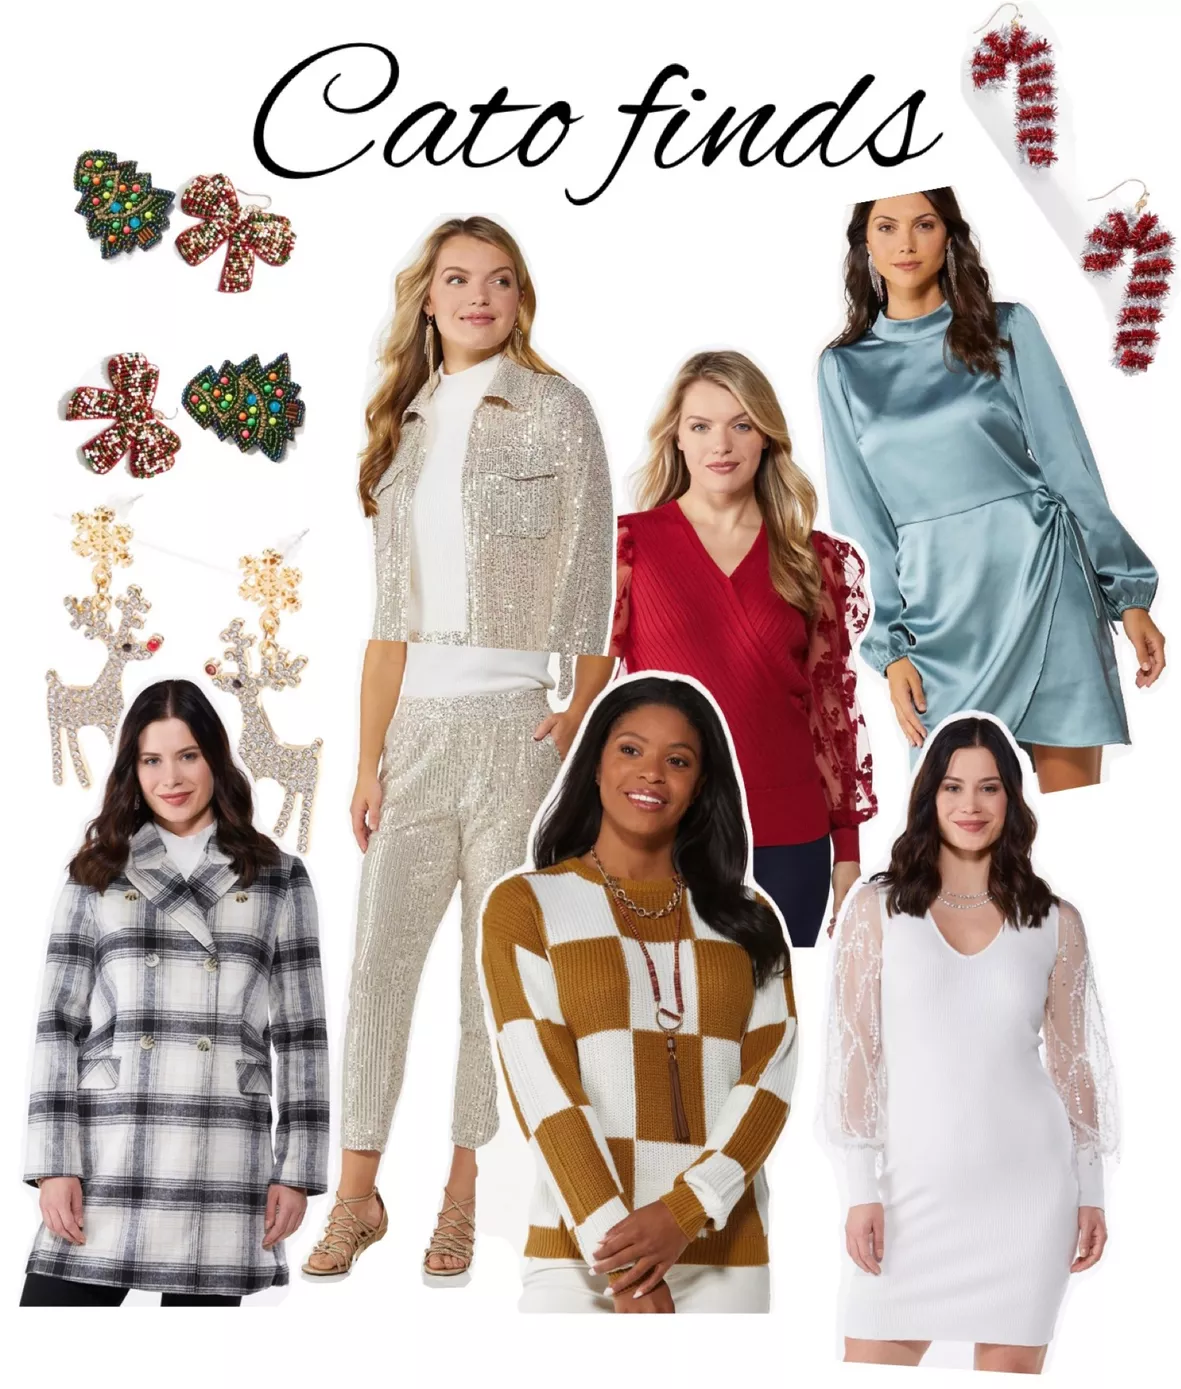 HOLIDAY LOOKS FROM CATO FASHIONS